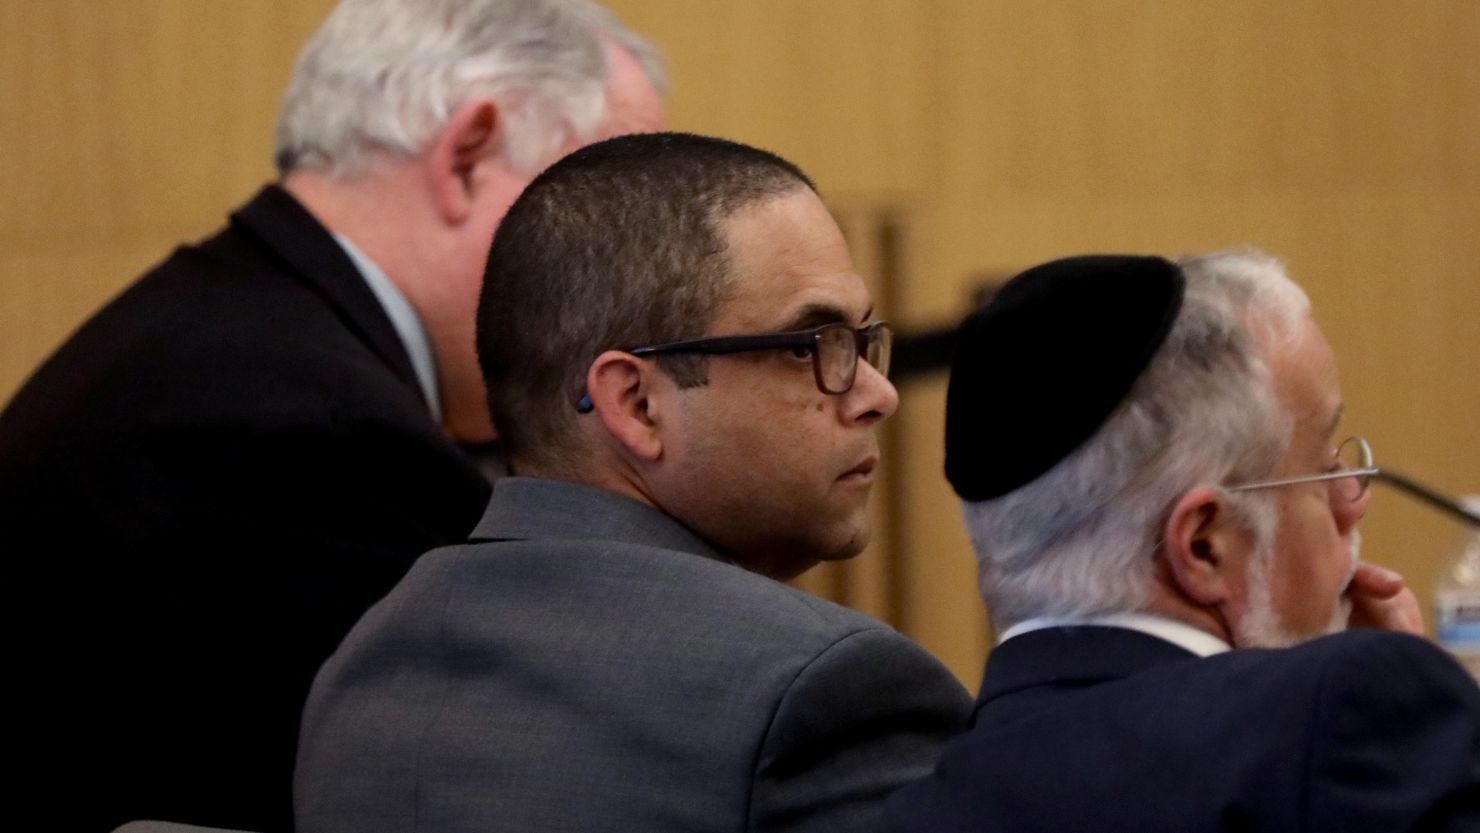 Eddie F. Gonzalez, 51, center, with lead attorney Michael Schwartz, right, and investigator Robert Dean, listen as a witness testifies during opening day proceedings in the trial of People vs. Eduardo Gonzalez in Dept. 21 at the Gov. George Deukmejian Courthouse in Long Beach on April 4, 2024.